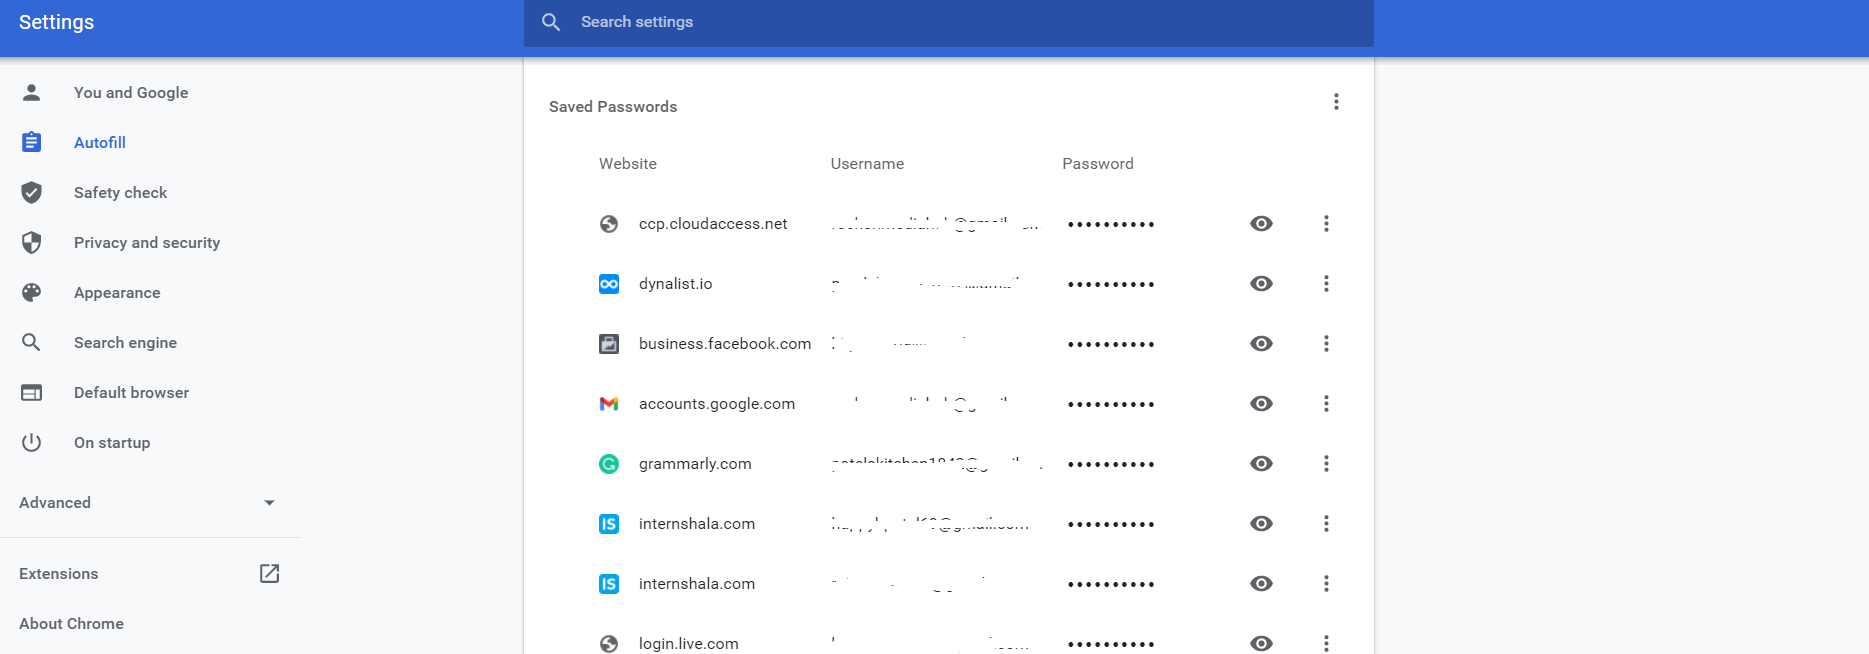 find saved passwords in Google Chrome